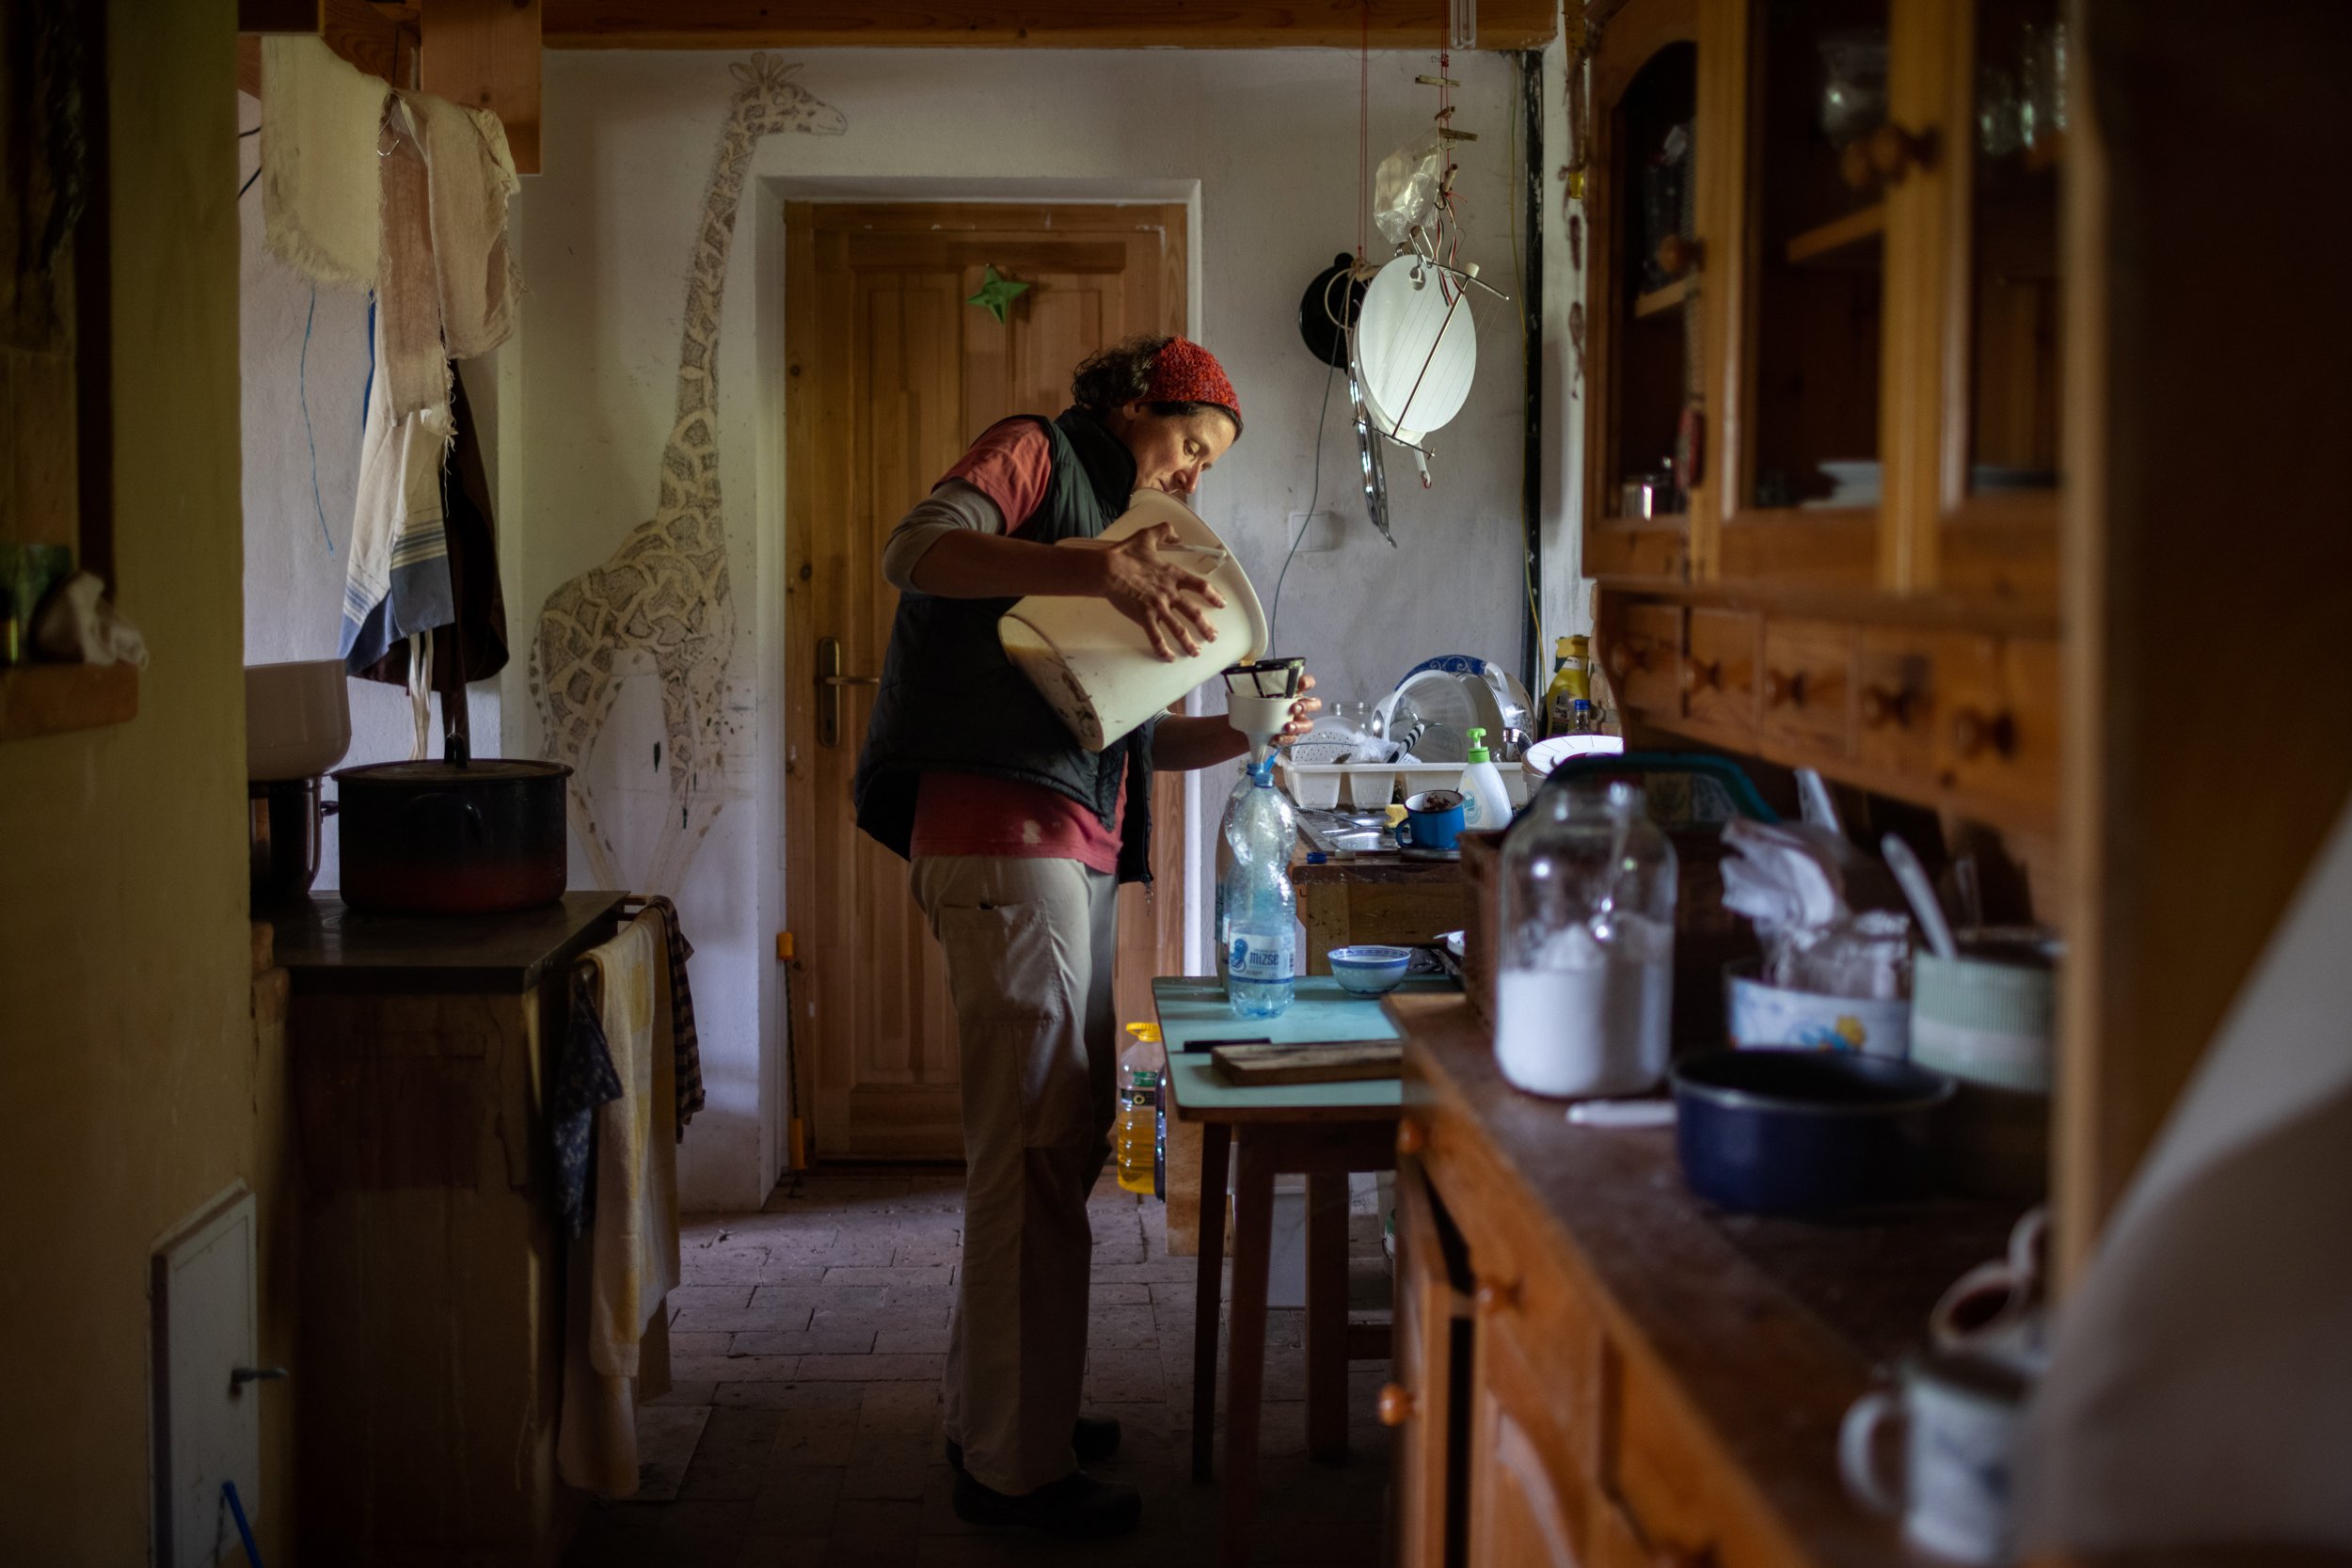  Etelka dispensing  fresh milk in her kitchen in Nagyszékely on May 11, 2022. She and her daughters  moved from the capital to the village in 2008, where they set up for self-sufficiency in food. Through experience and overcoming many difficulties, t